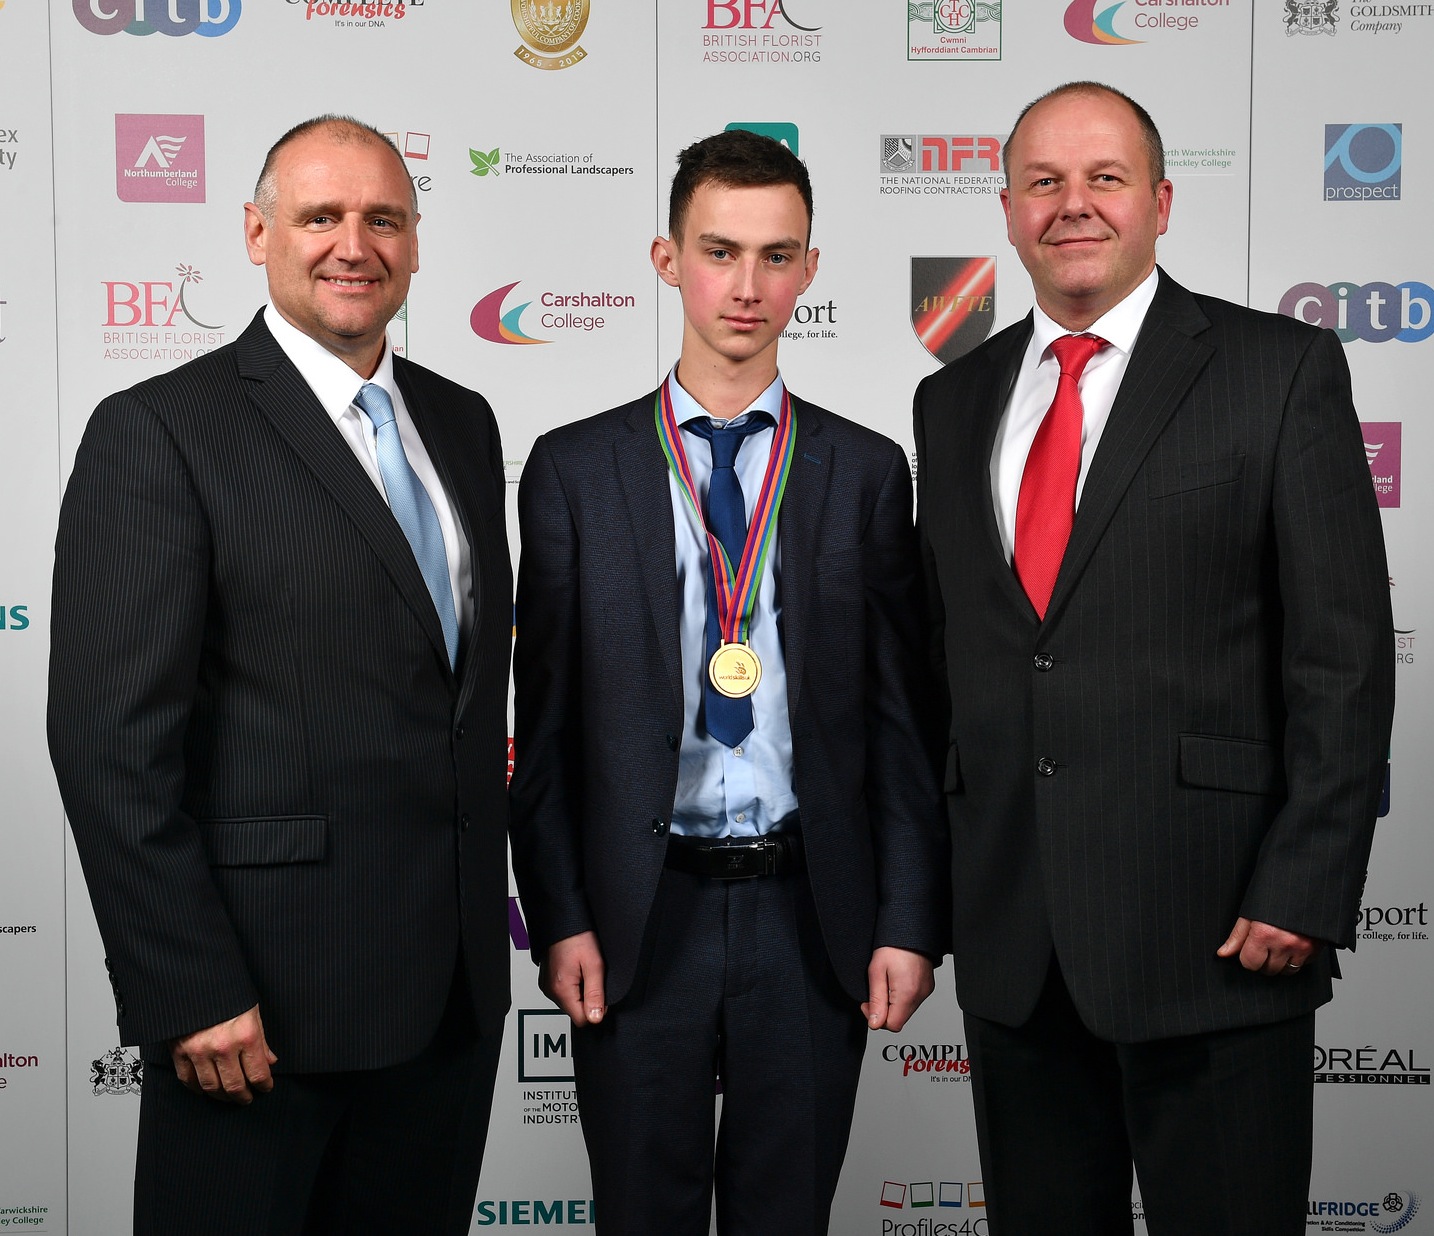 Gold medal for Luke Courtney in national SkillFRIDGE competition, sponsored by Toshiba